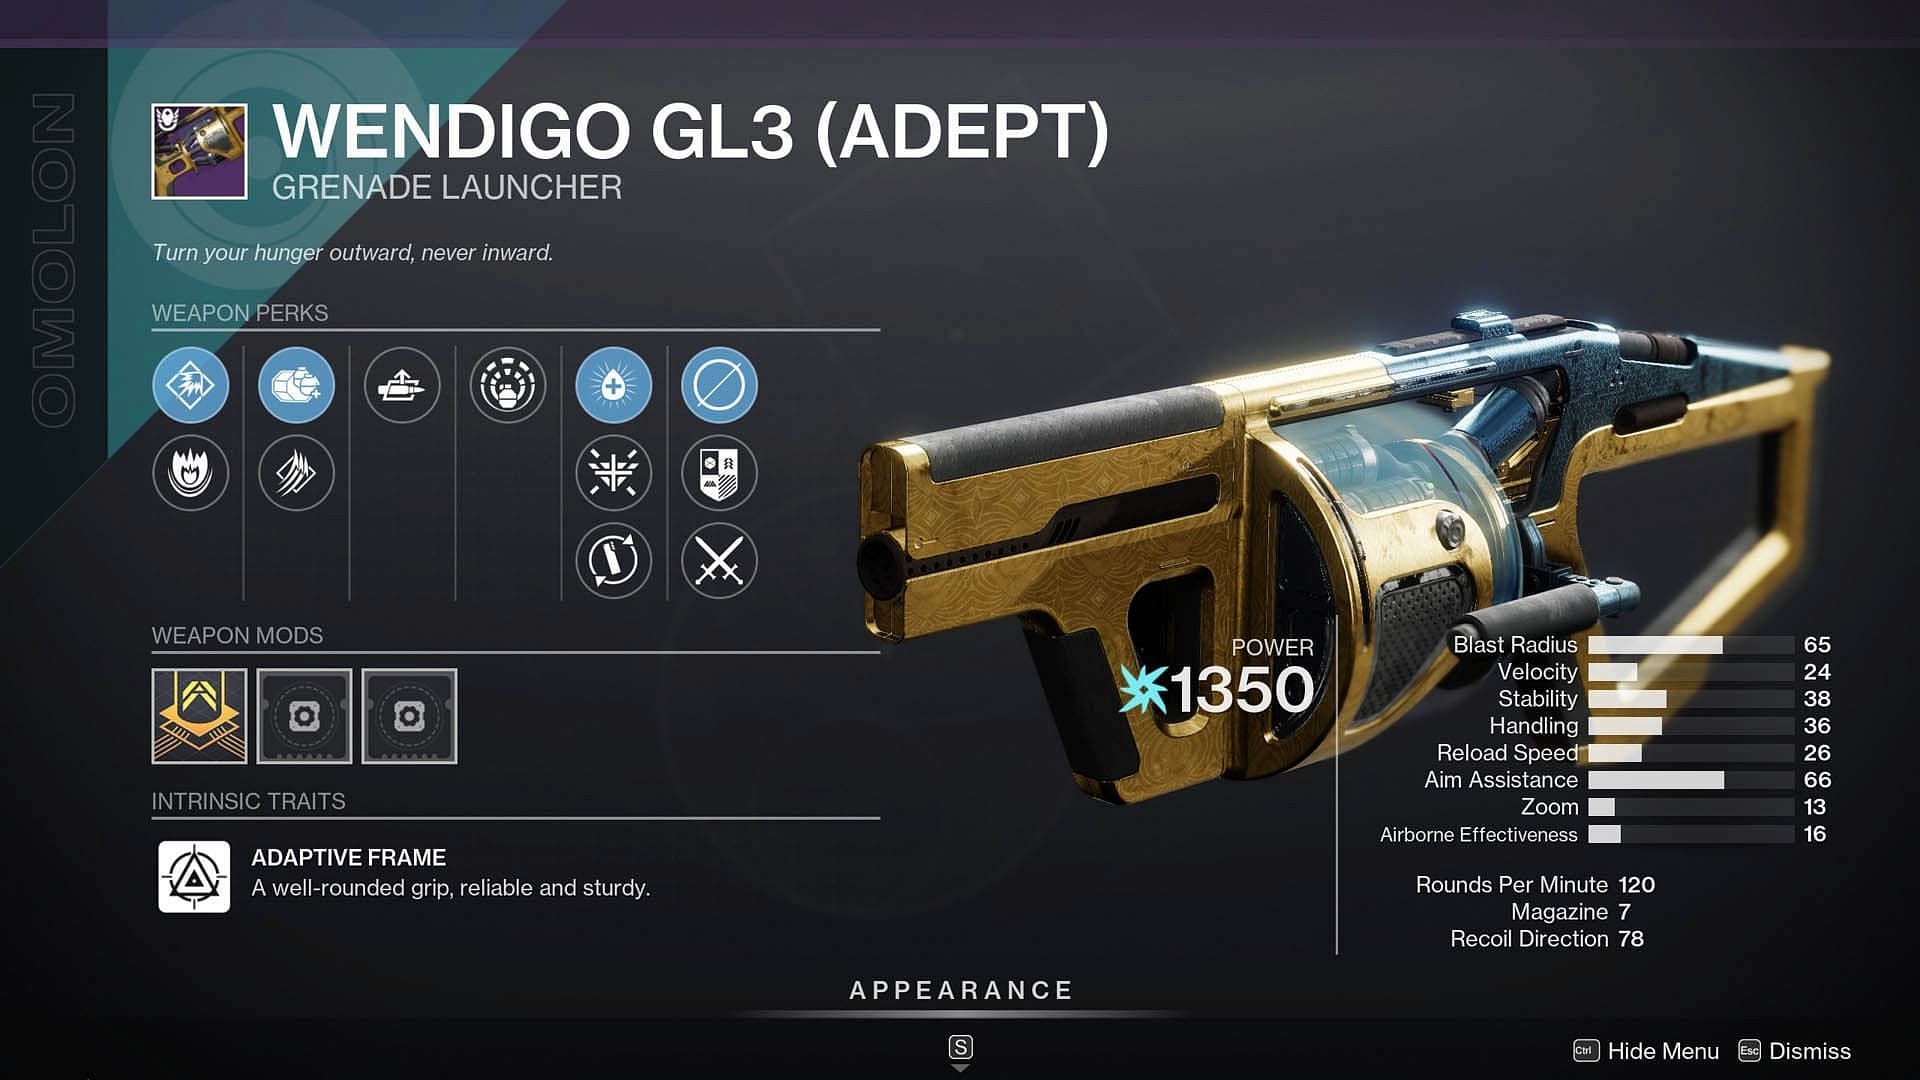 Wendigo GL3 is a solid weapon pick in Destiny 2 (Image via Bungie)